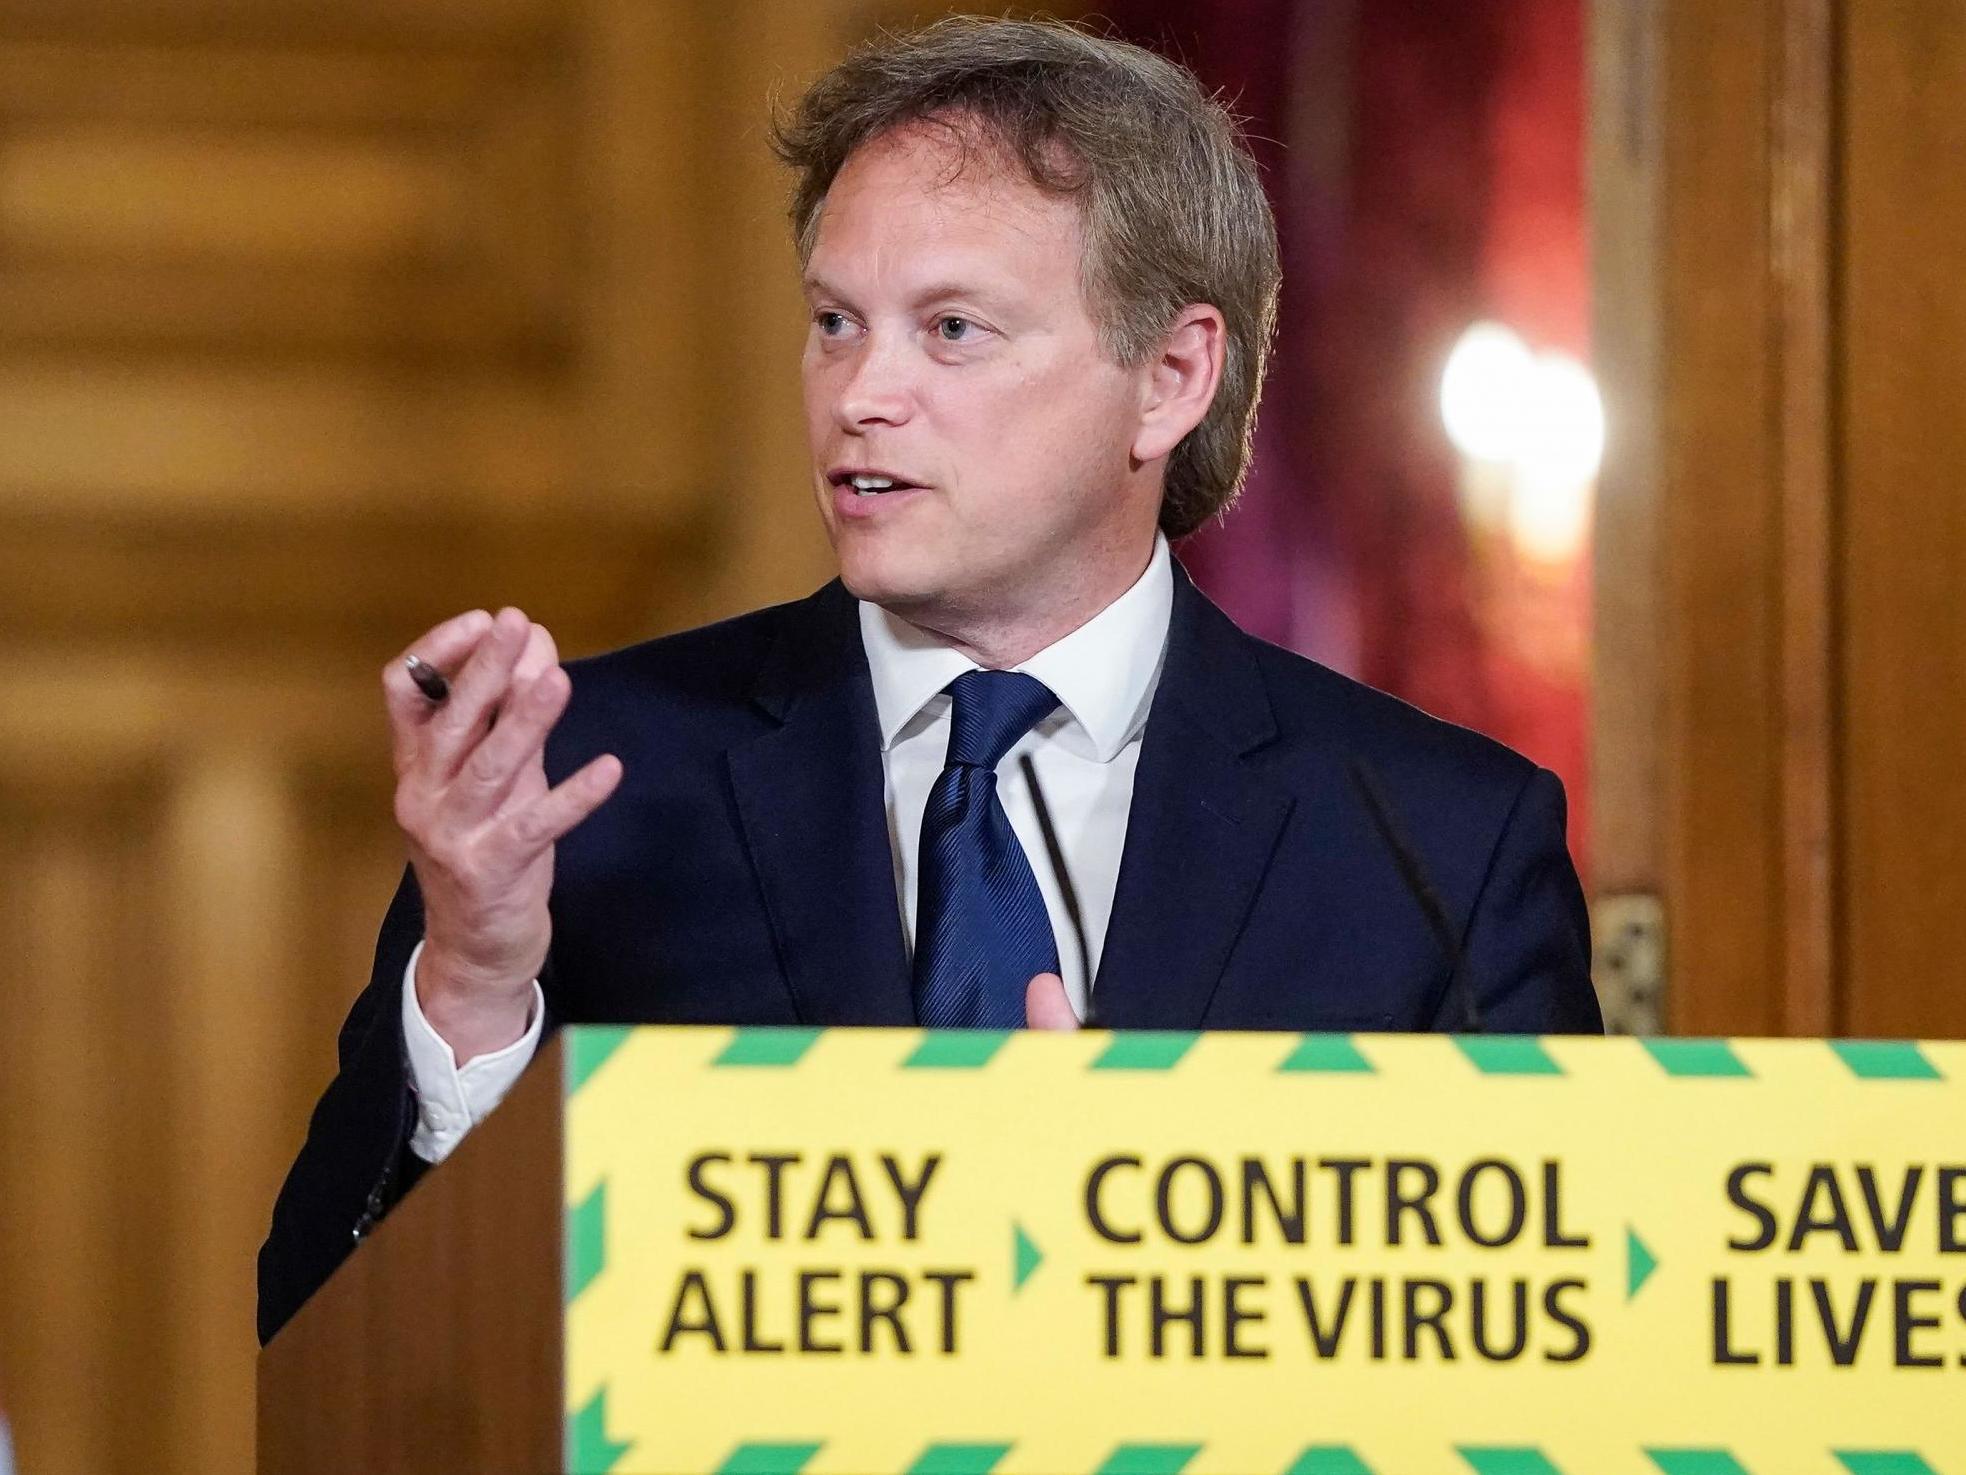 In April the minister had attempted to ward members of the public off booking a holiday by saying he himself would not be doing so because of the trajectory of the coronavirus